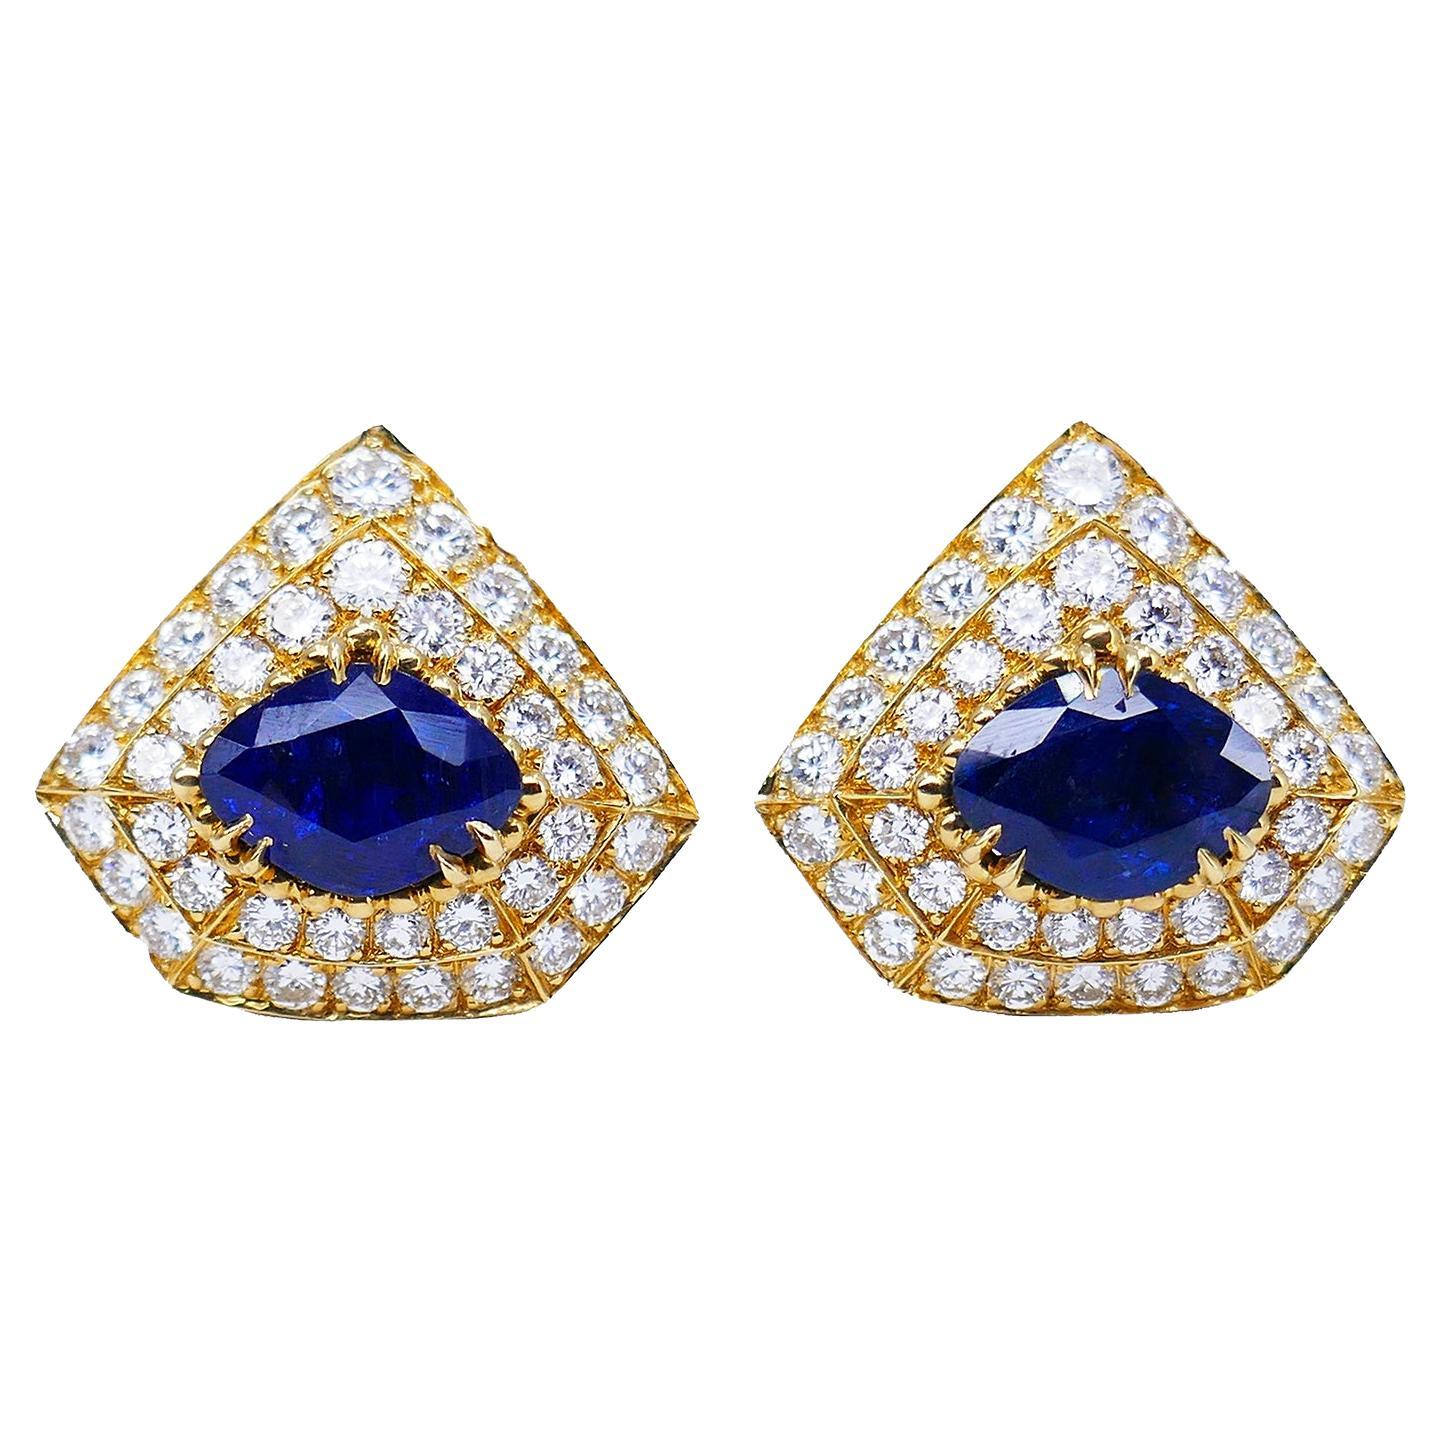 Areza Vintage French Earrings 18k Gold Sapphire Diamond Estate Jewelry For Sale